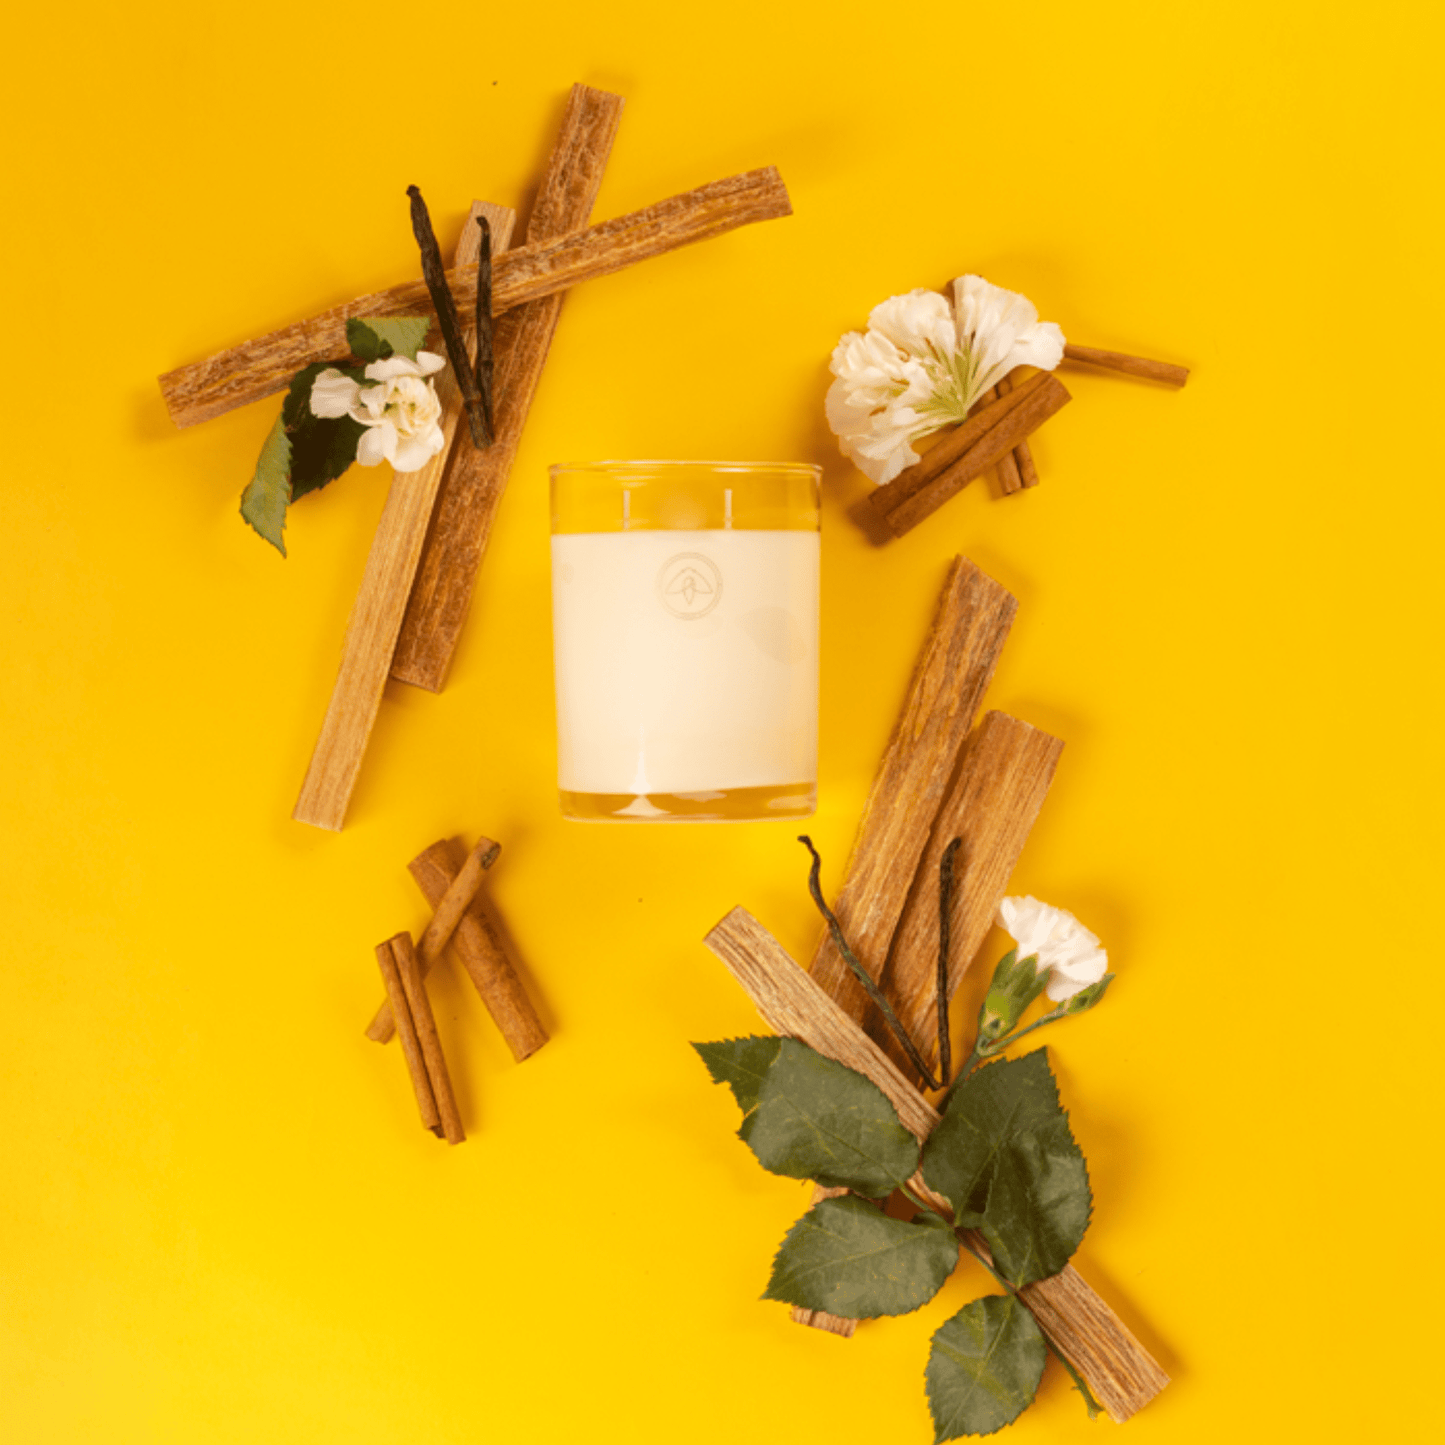 Clarity Shoreside Fire 10 candle on a yellow background surrounded by flowers, vanilla, and nutmeg